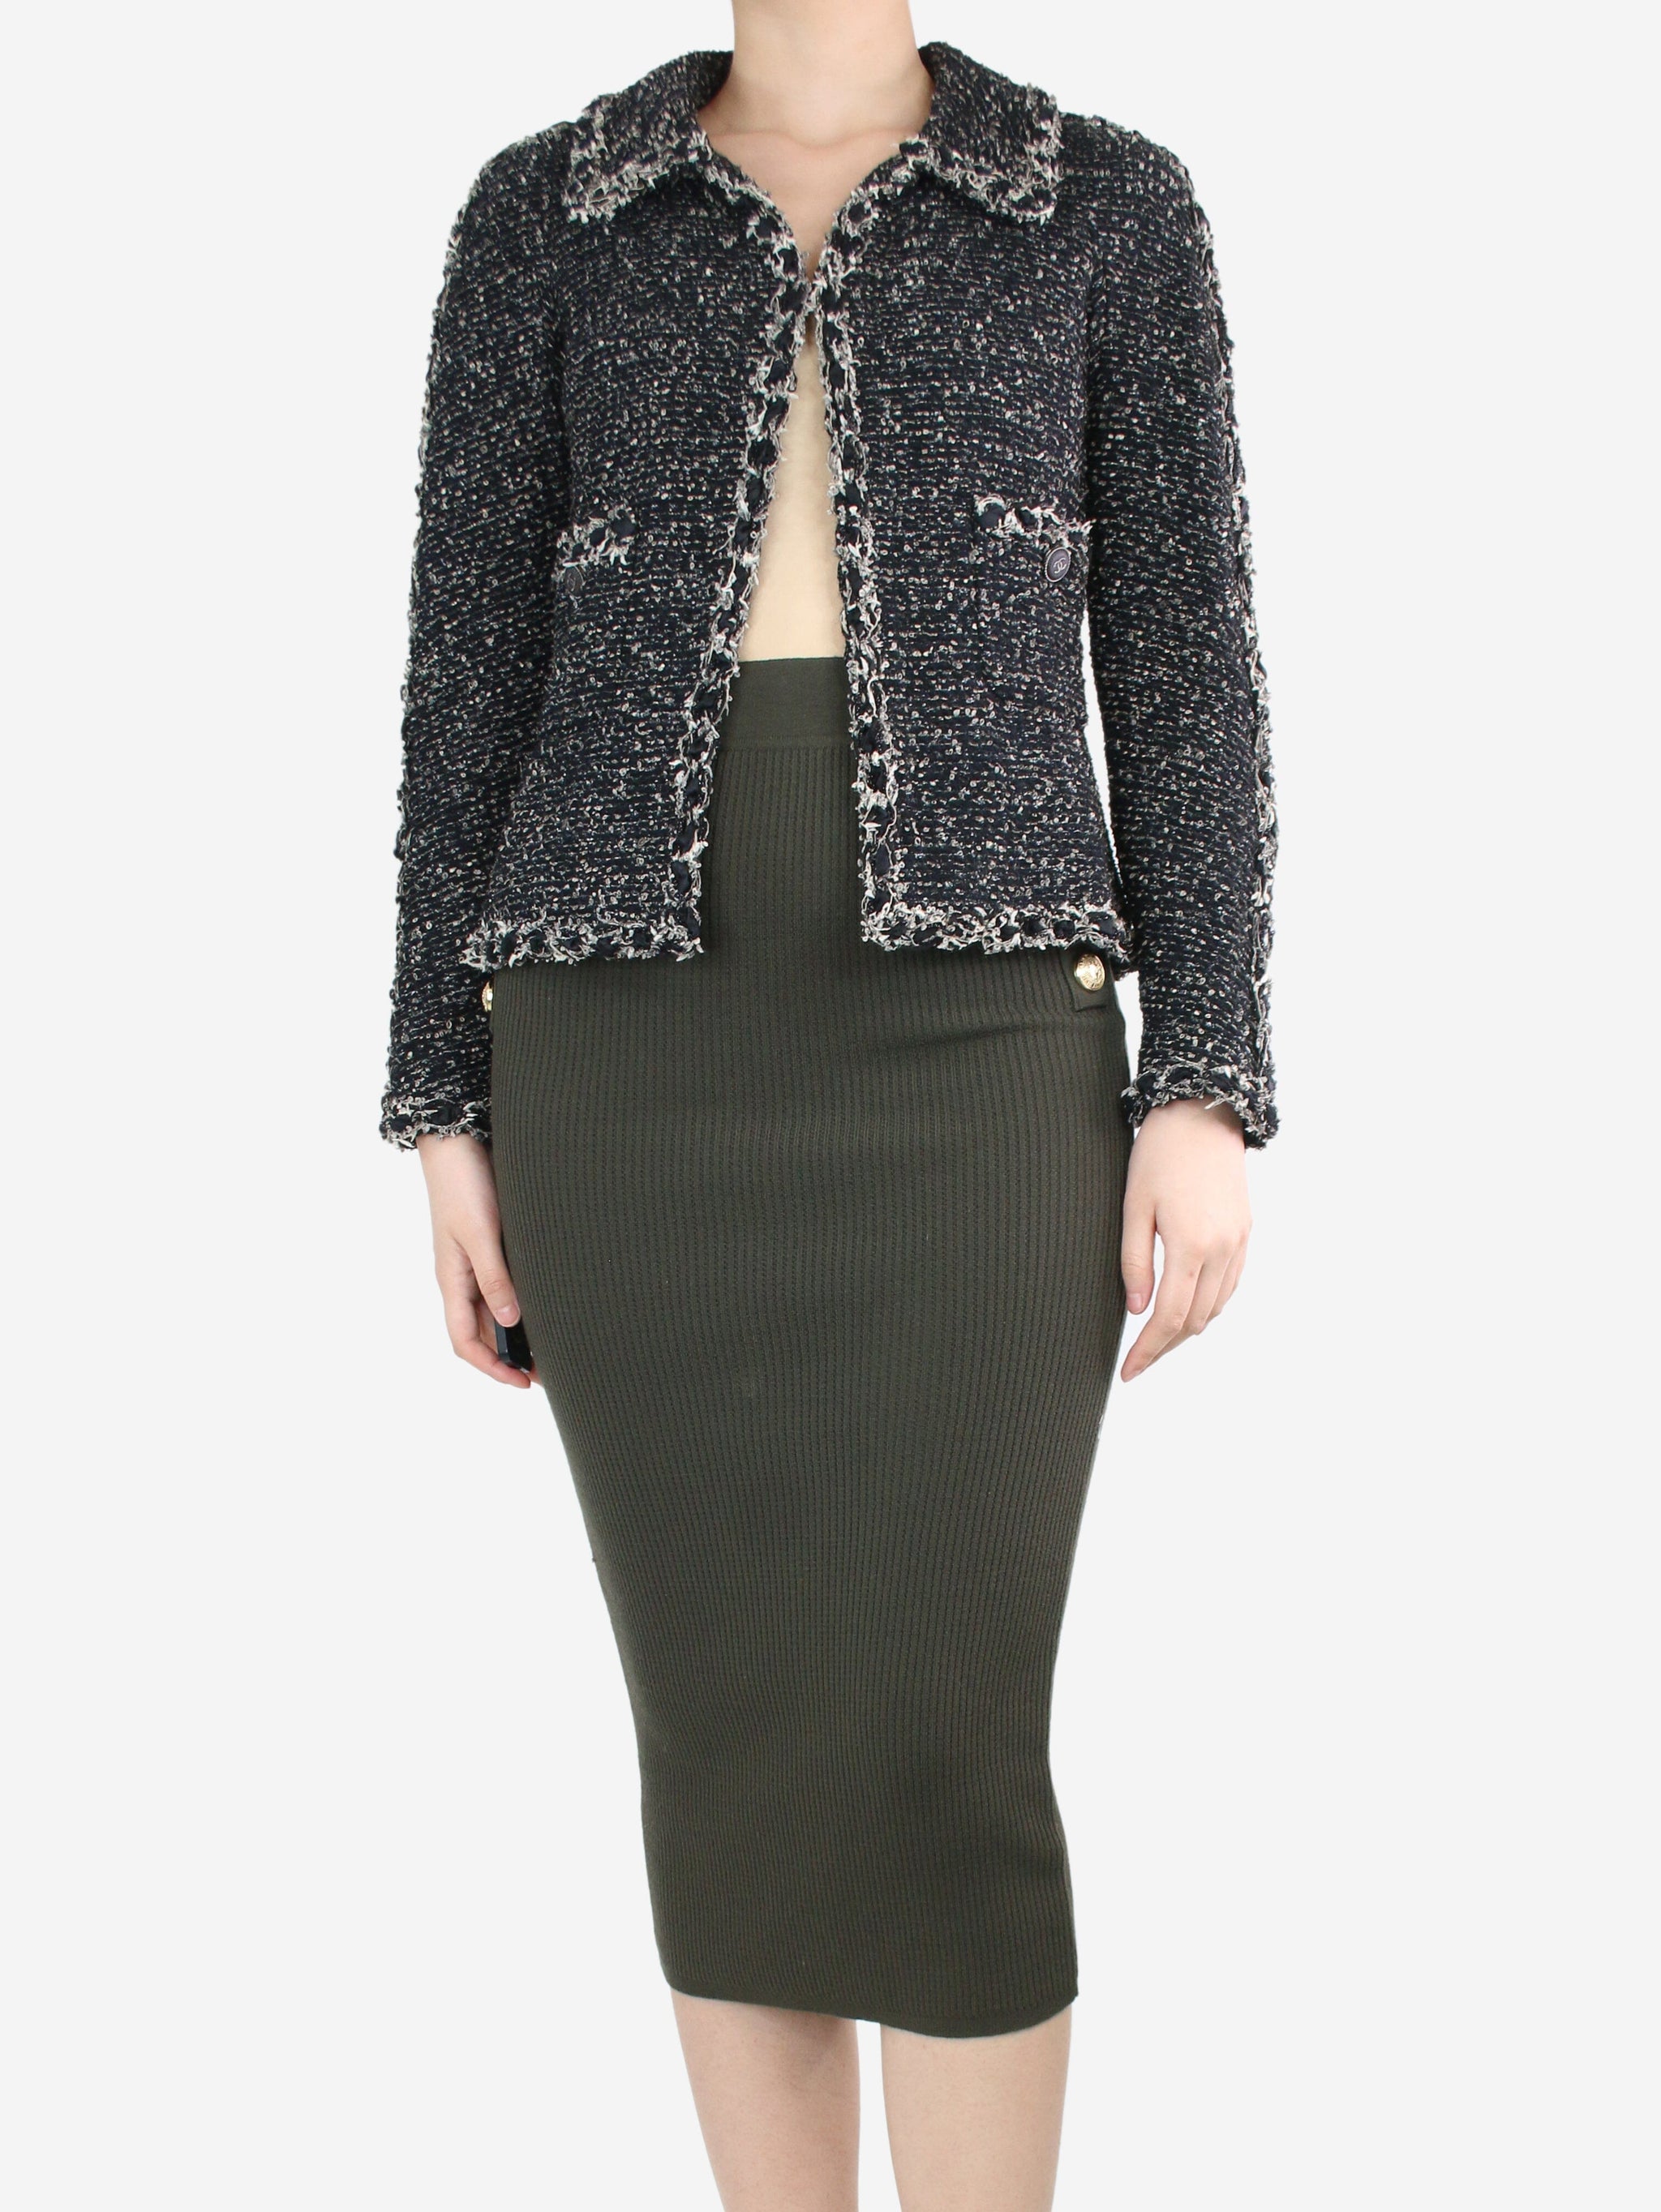 Chanel pre-owned black tweed textured jacket - size UK 8 | Sign of the ...